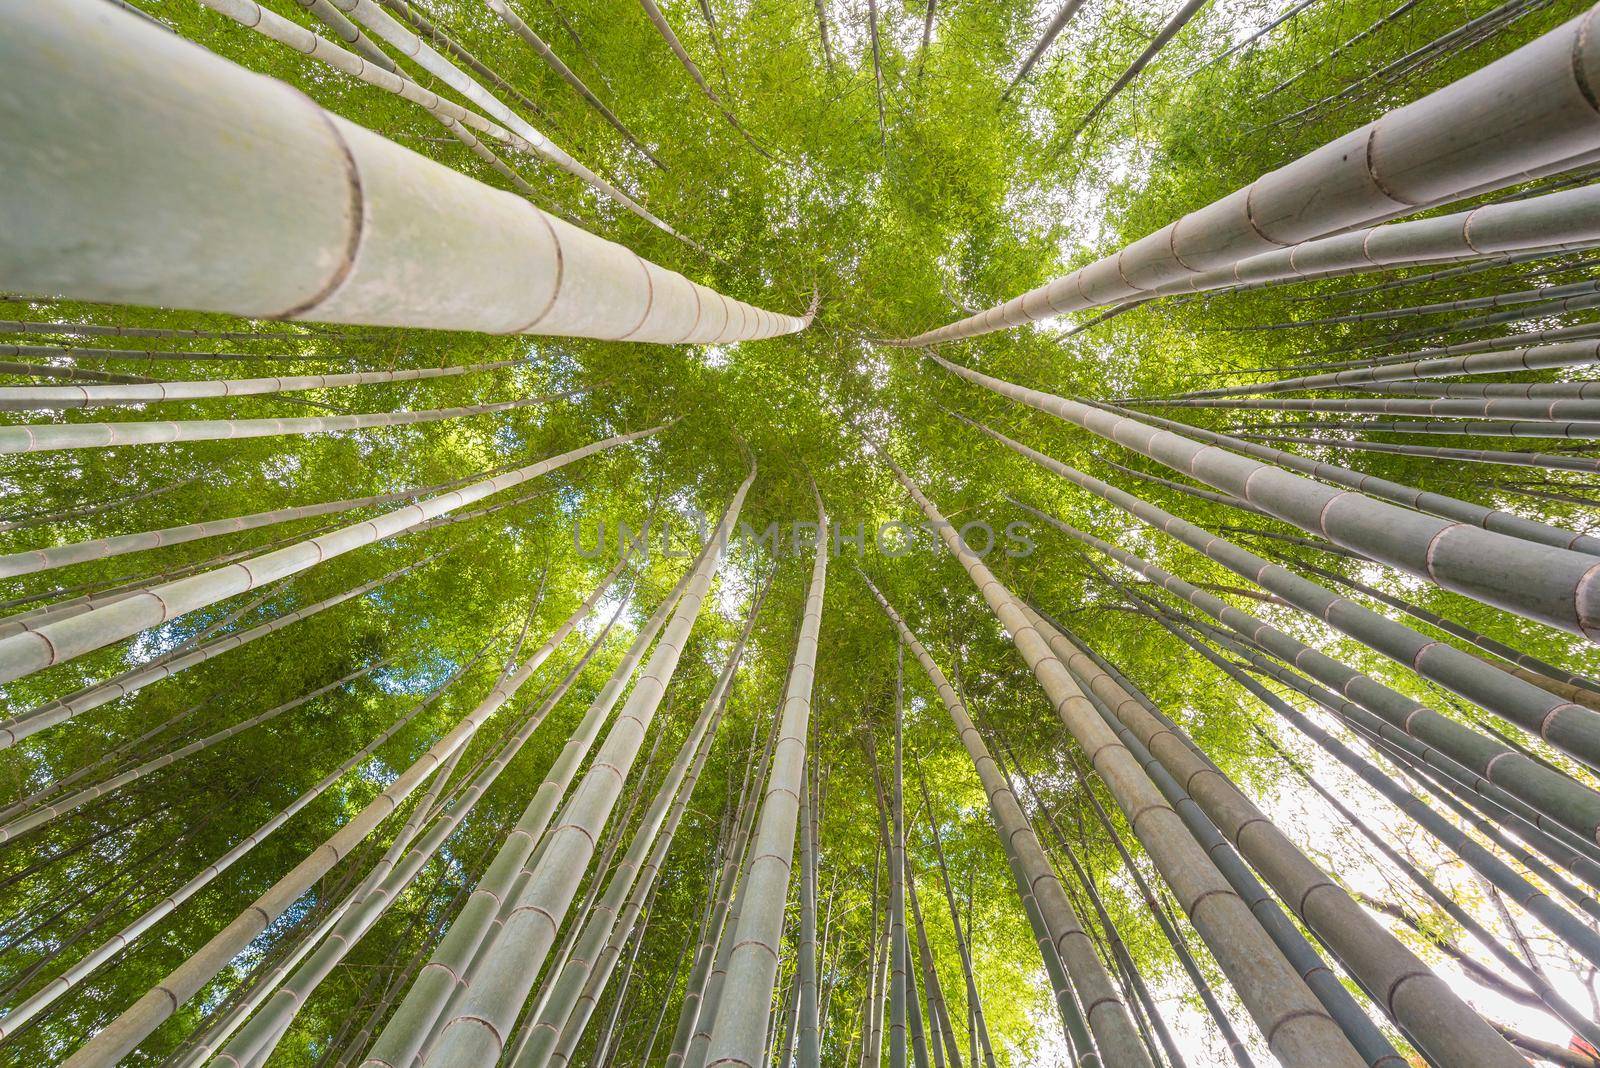 The uprisen angle of bamboo forest with glorious morning sunshine in Kyoto,Japan
 by Nuamfolio